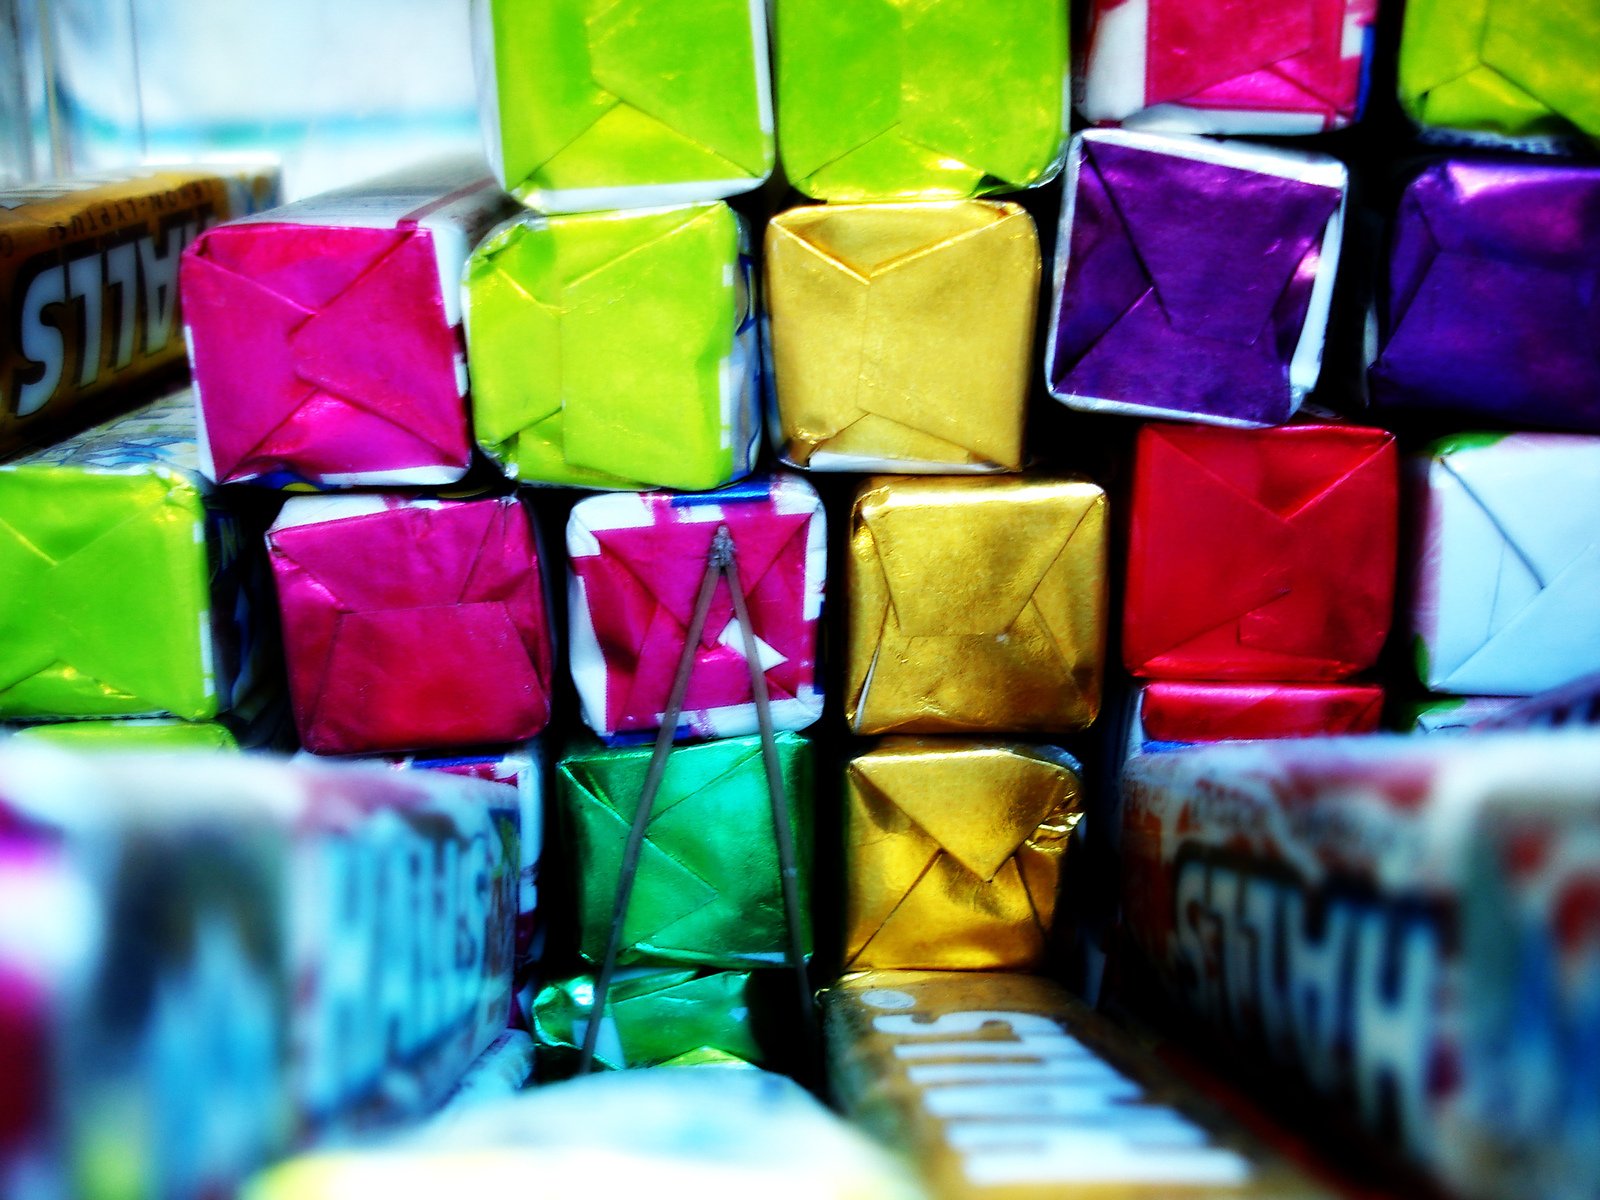 the large, multi - colored boxes were wrapped in tissue paper